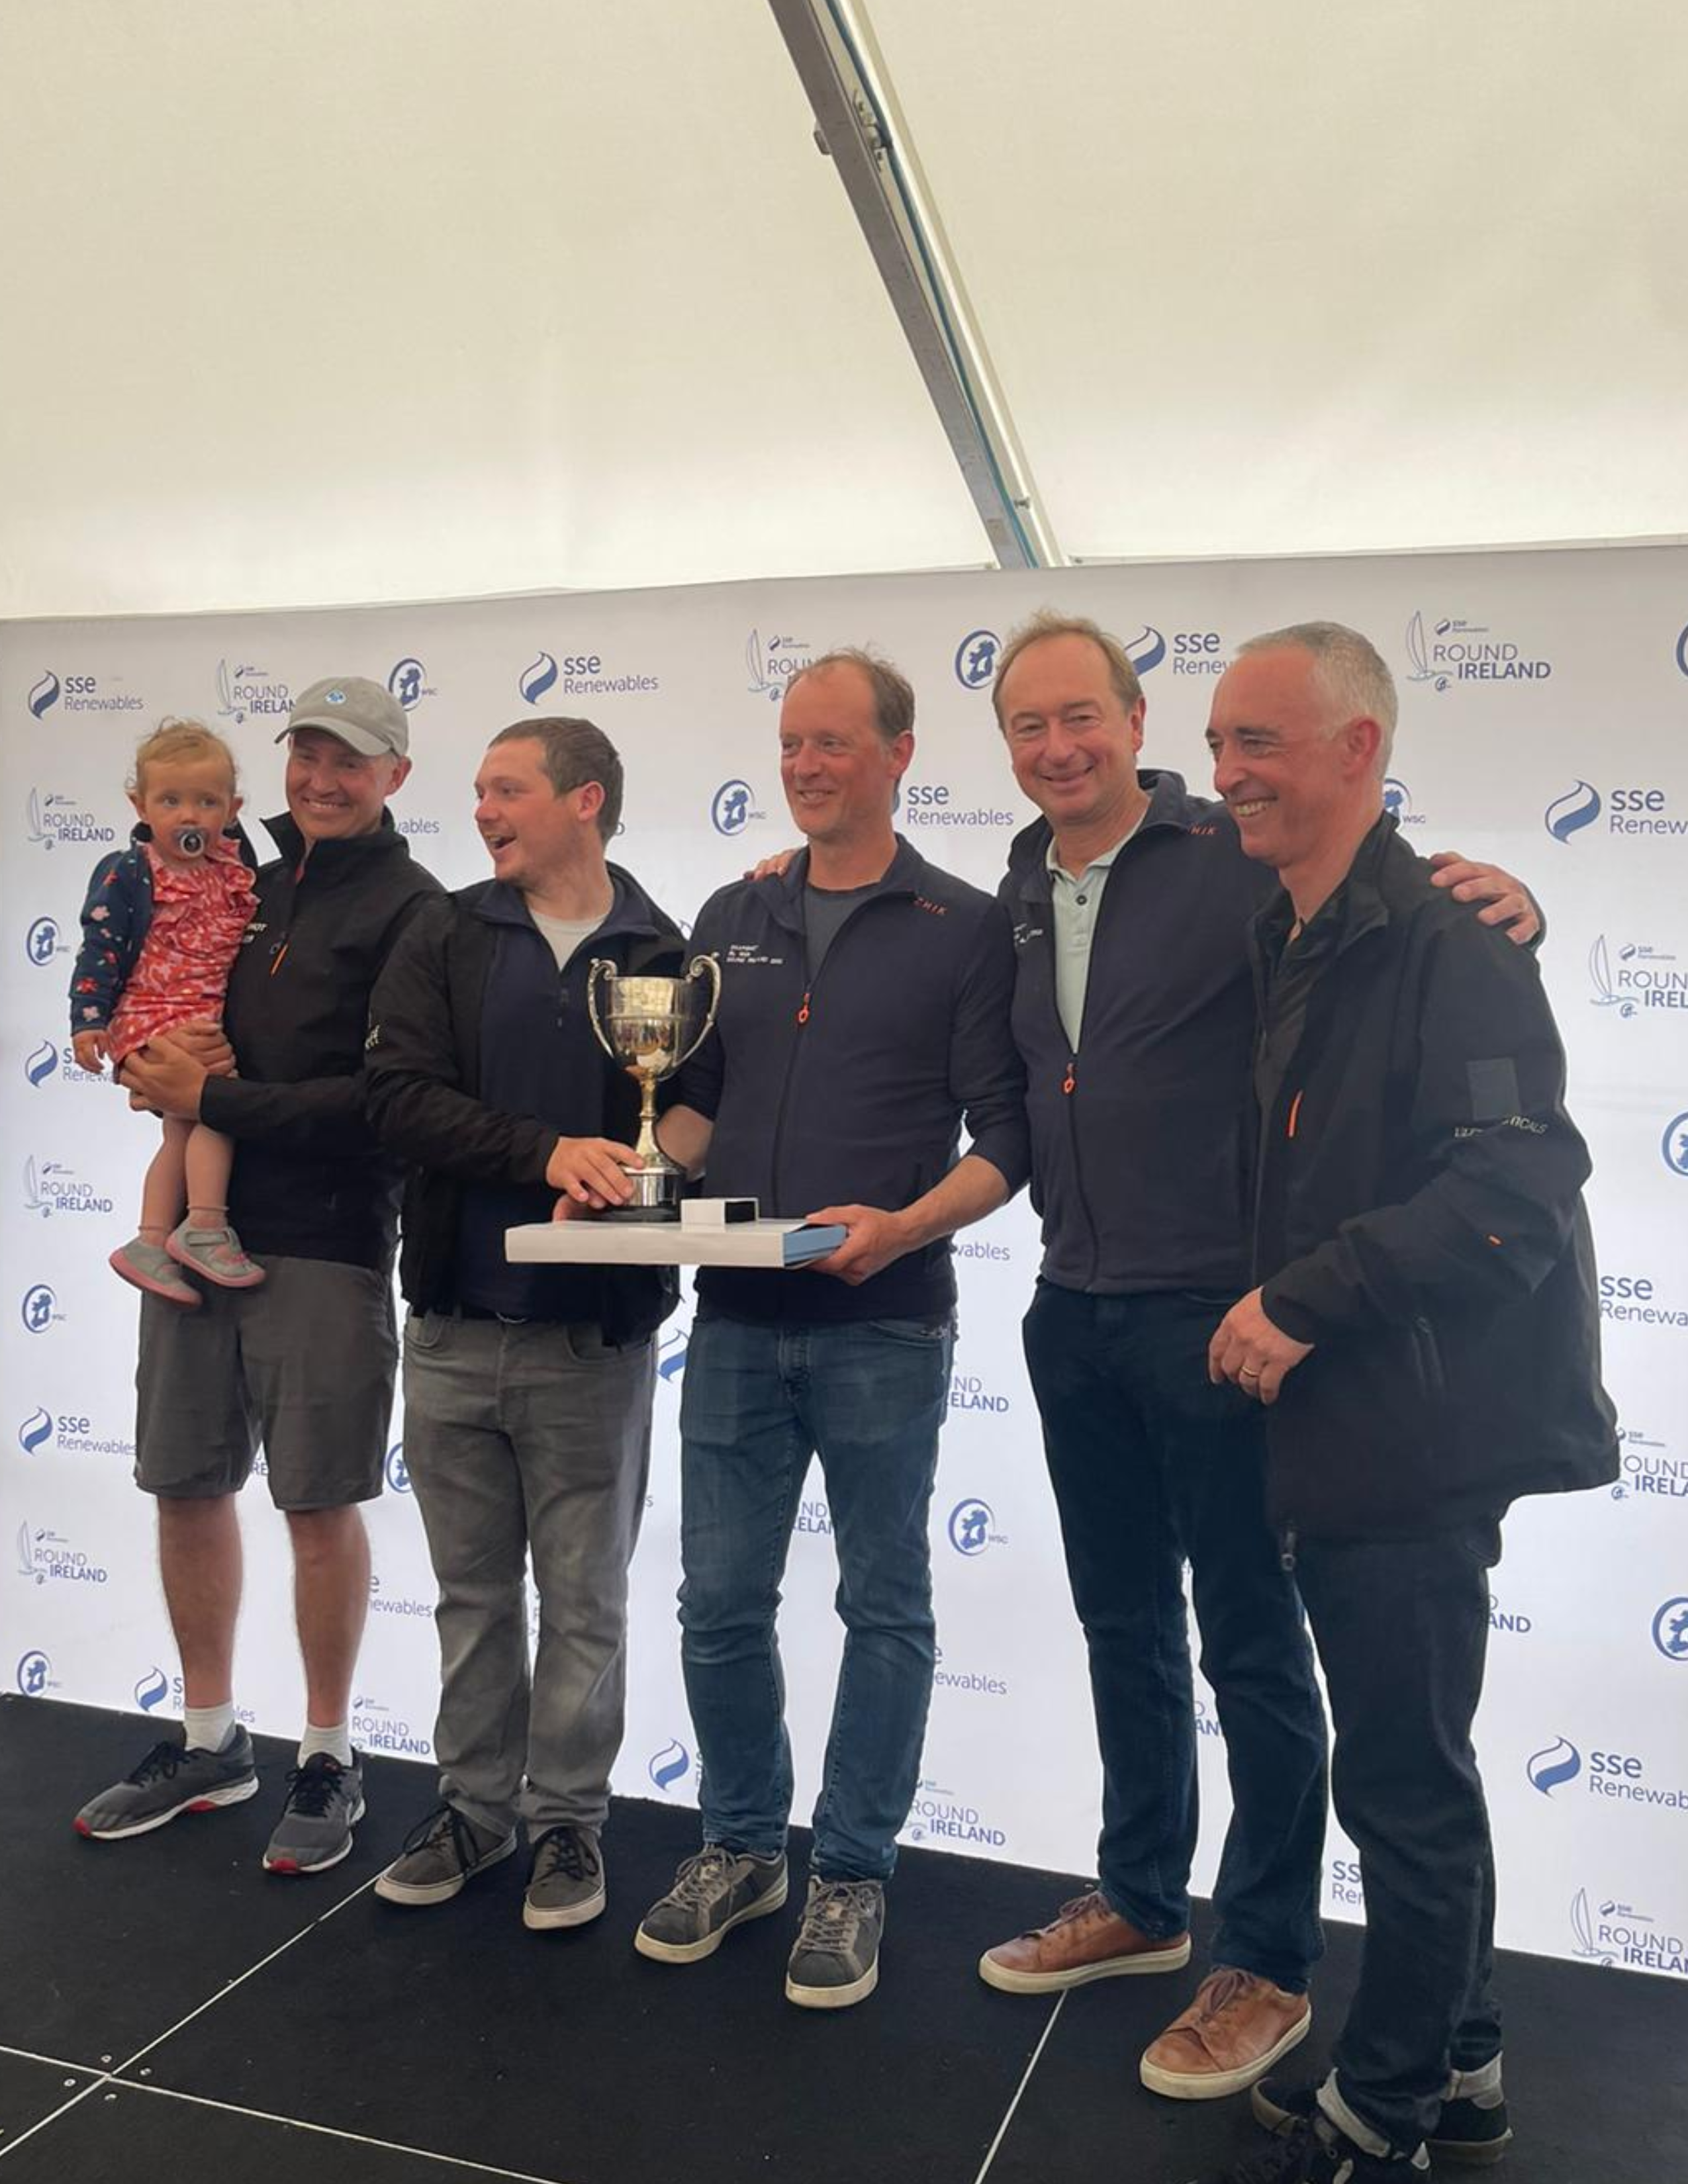 Collecting Class 3 prize at Wicklow Sailing Club -- from left: Shane Hughes, Daragh White, Richard Evans, Michael Evans, John Phelan (absent - Nick Cherry)